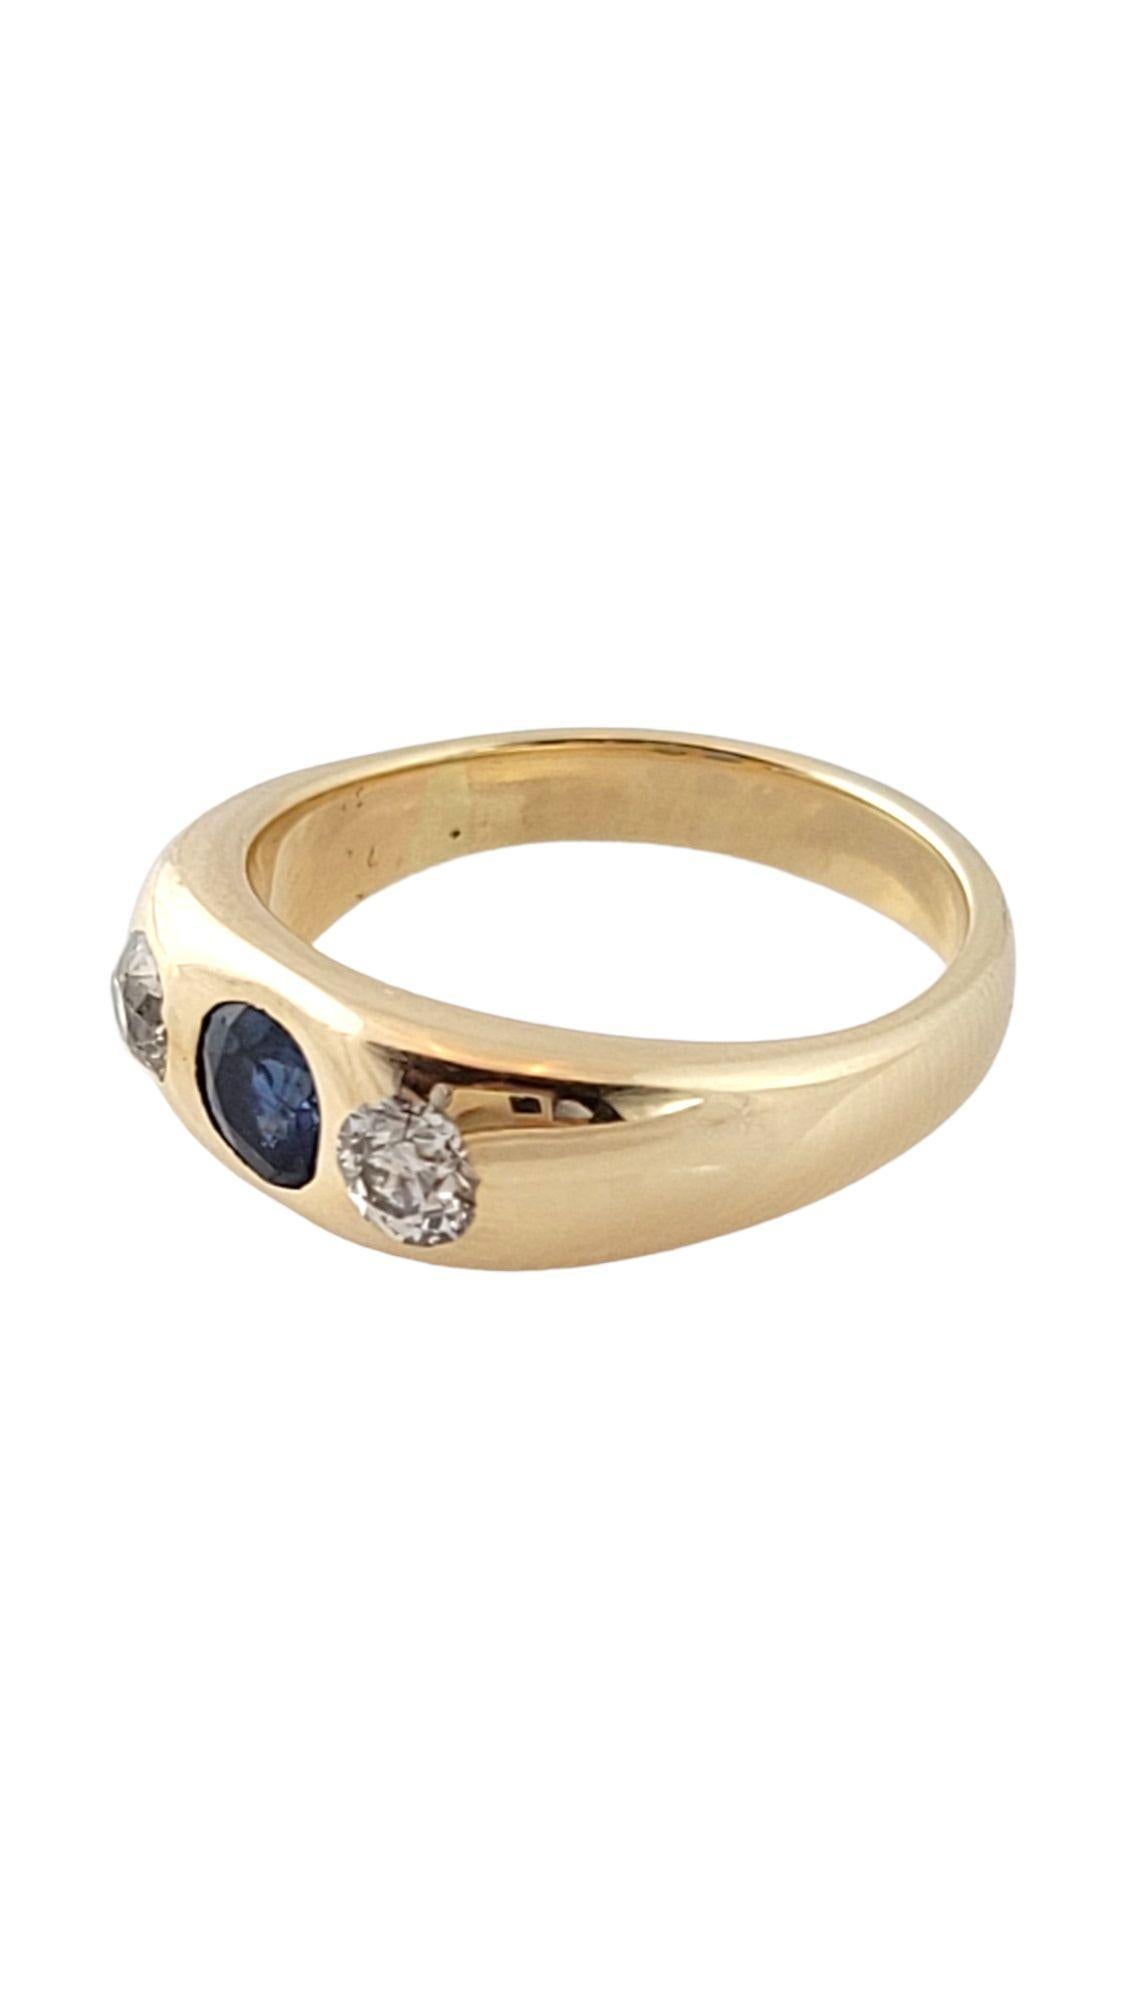 Vintage 10K Yellow Gold Diamond Natural Sapphire Ring Size 6

This gorgeous ring features one natural blue sapphire and 2 sparkling, European cut diamonds set in a 10K yellow gold band!

Approximate total diamond weight: .40 cts

Diamond clarity: